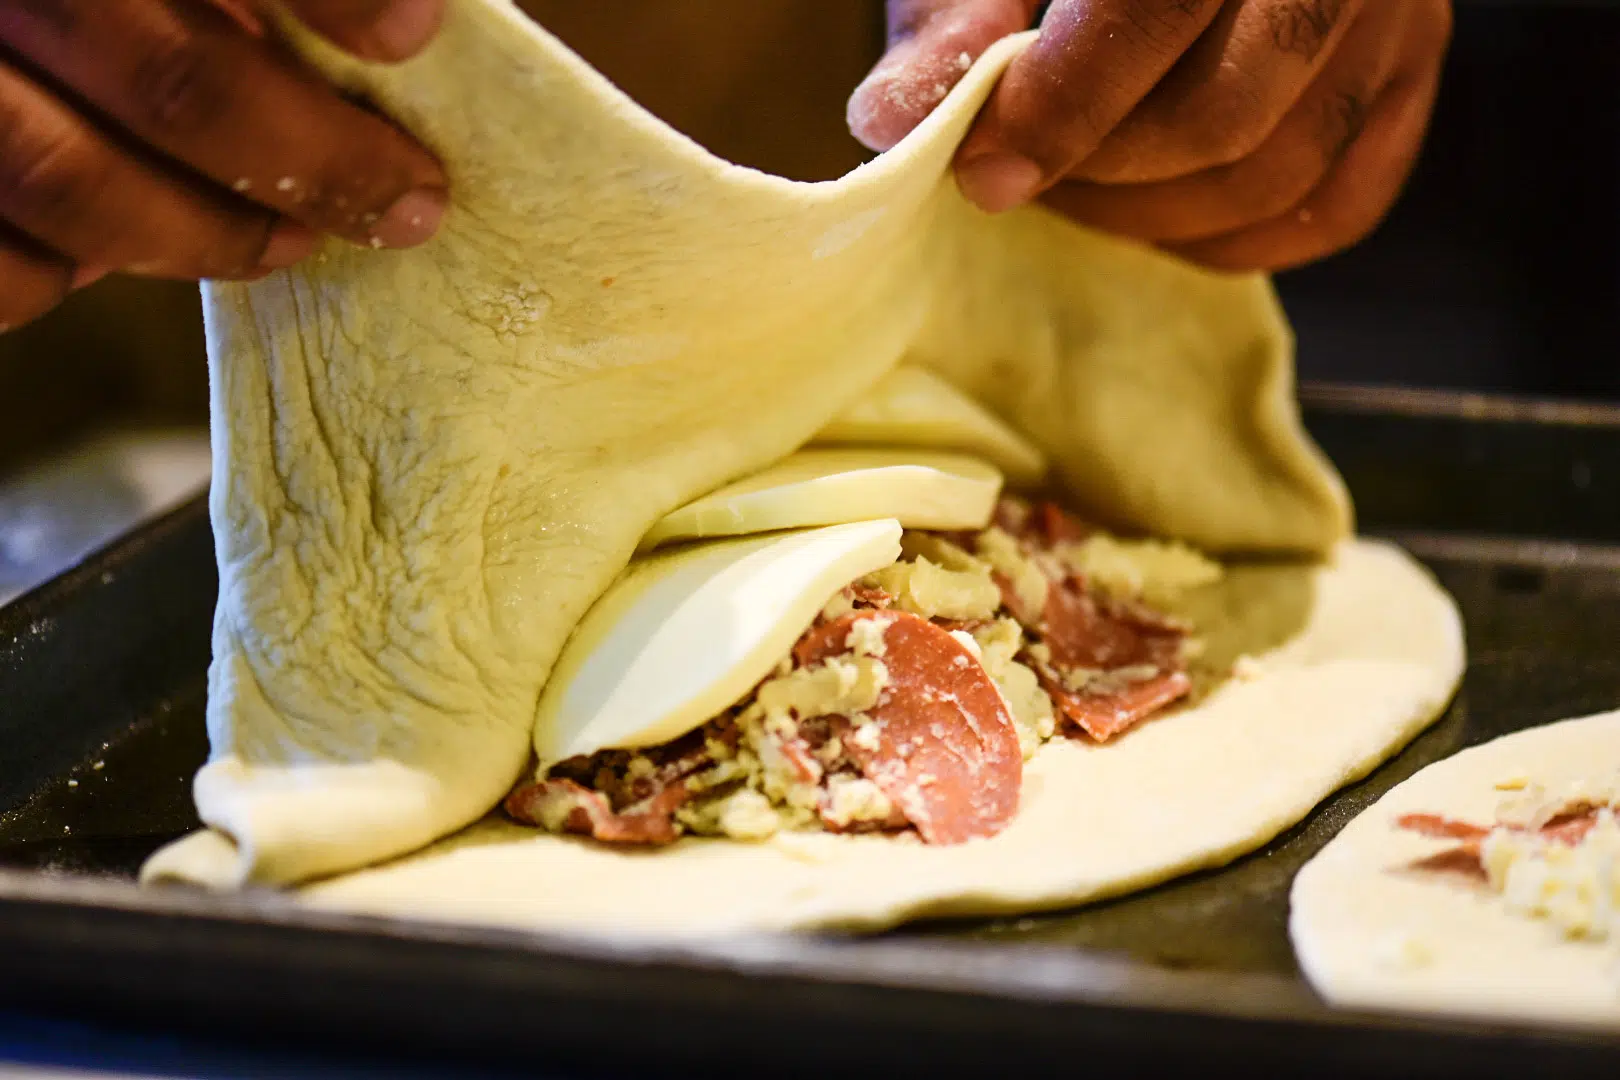 Folding the fresh dough over the stuffed ingredients